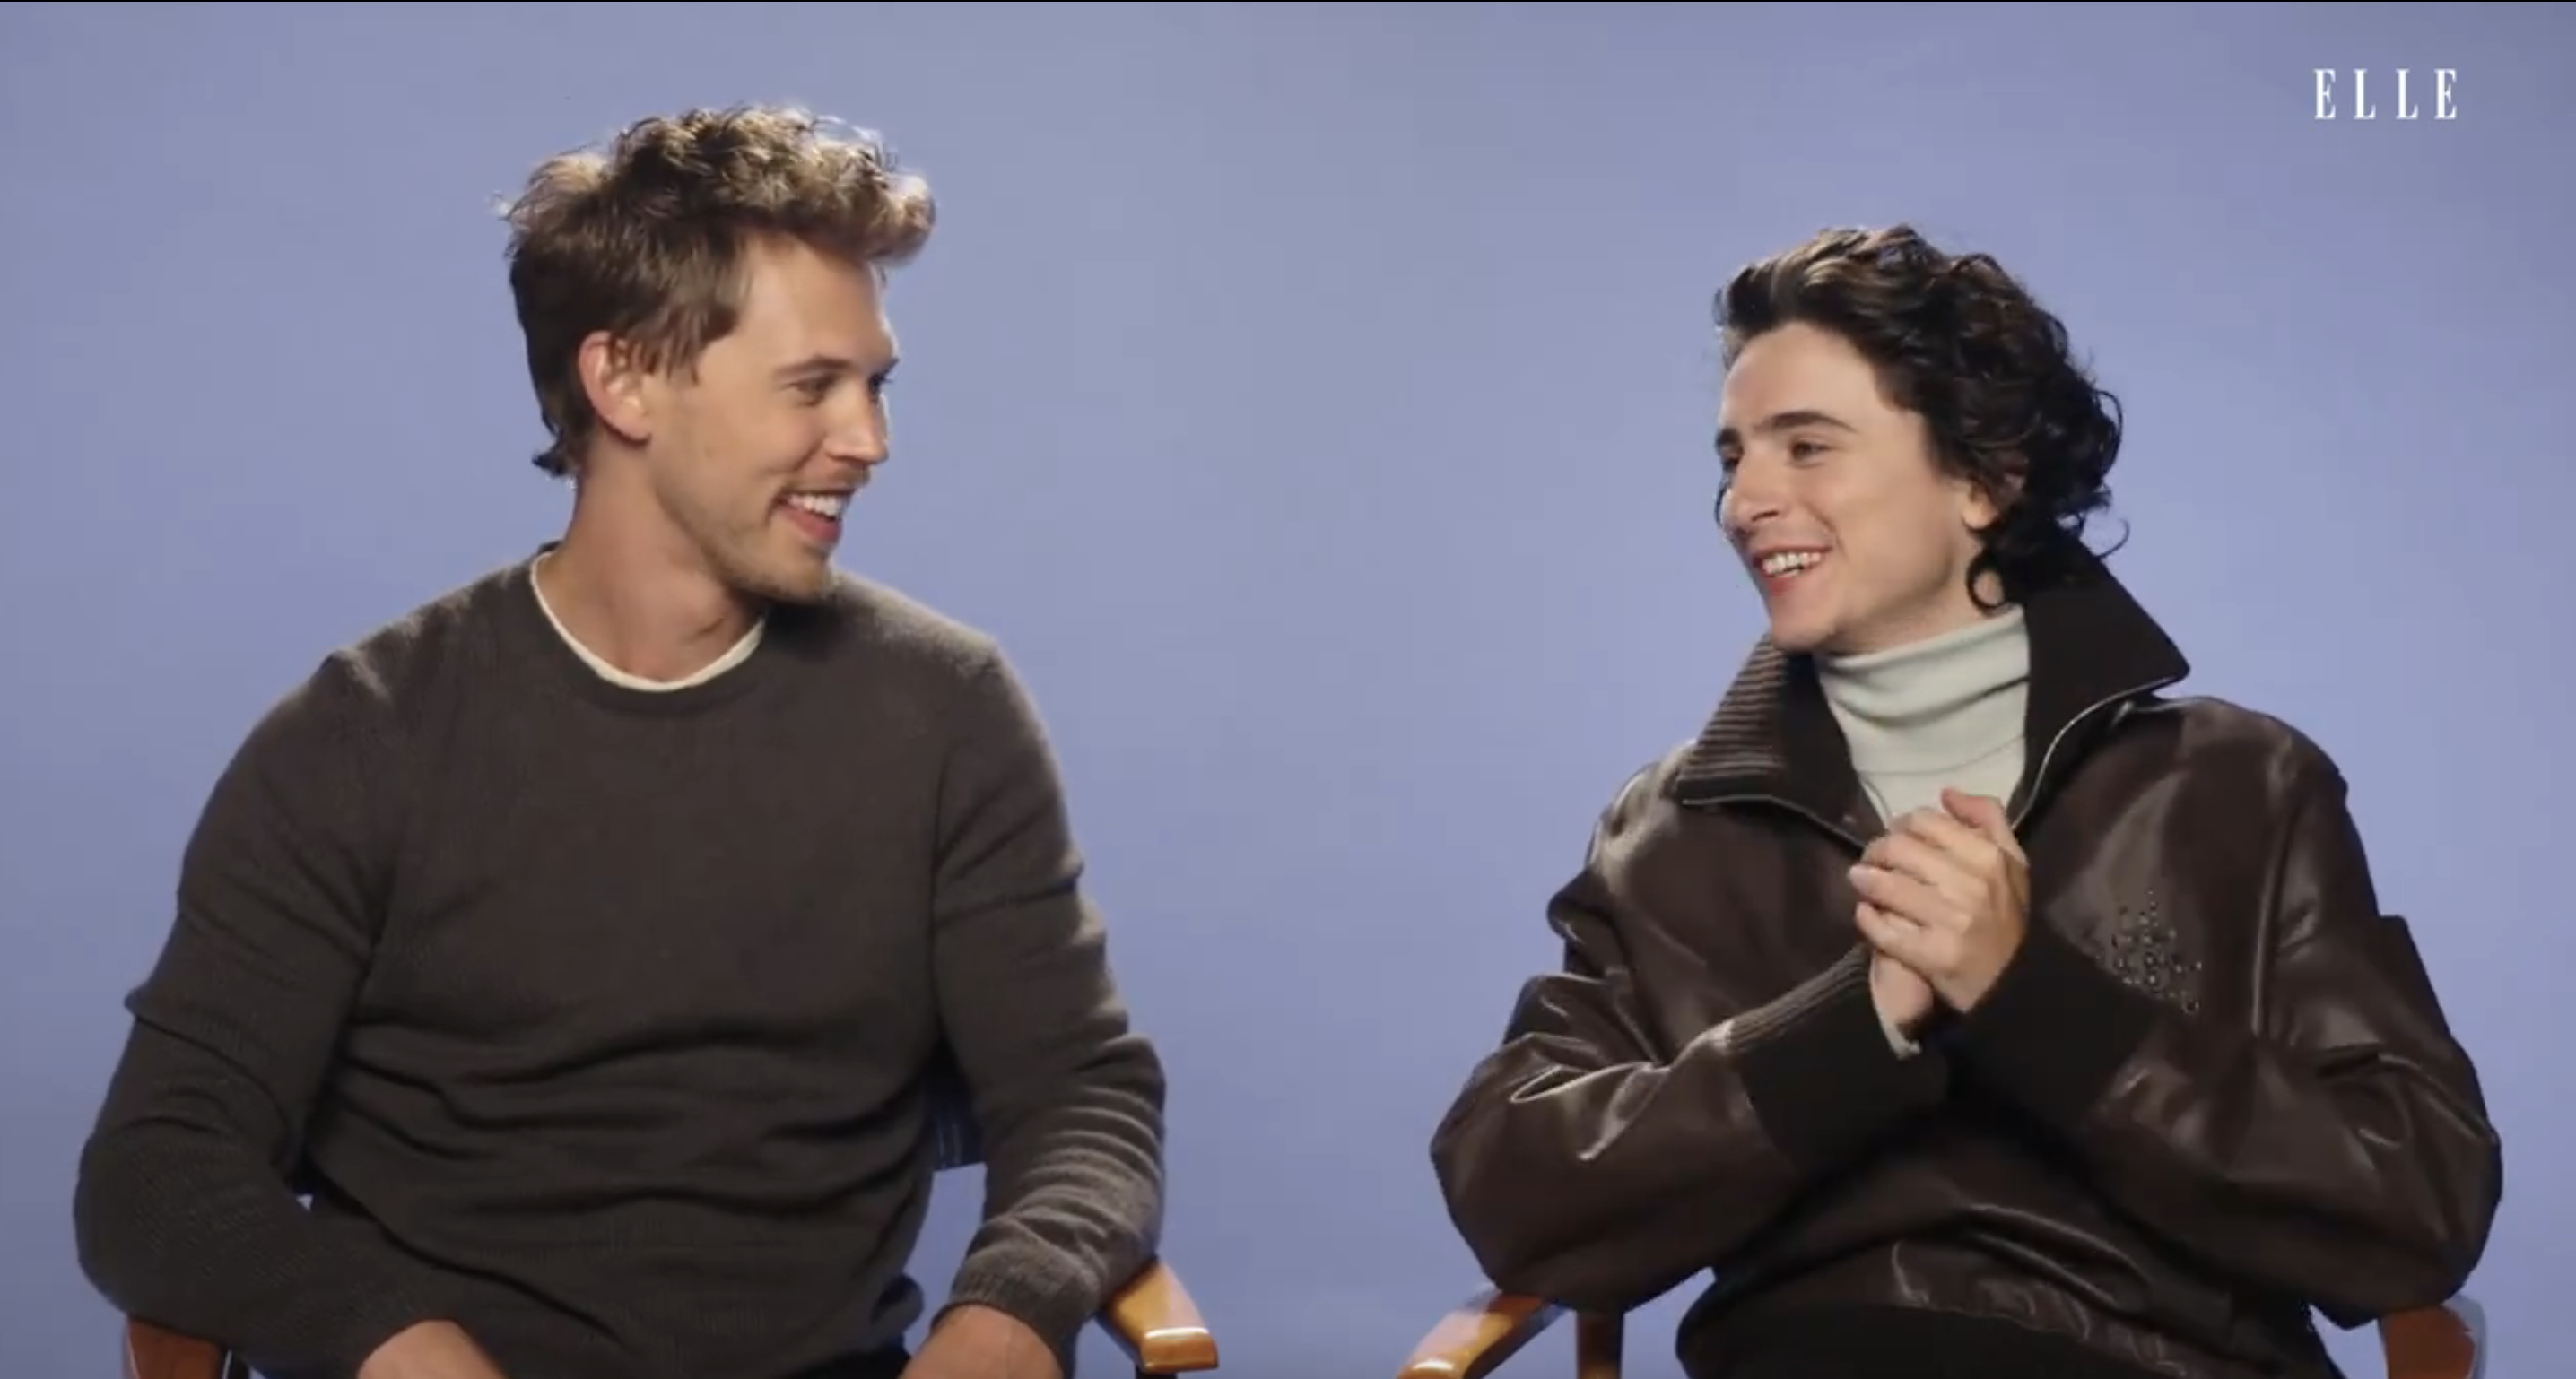 Timothée Chalamet and Austin Butler sitting on chairs, engaged in a joyful conversation, with one wearing a turtleneck and leather jacket